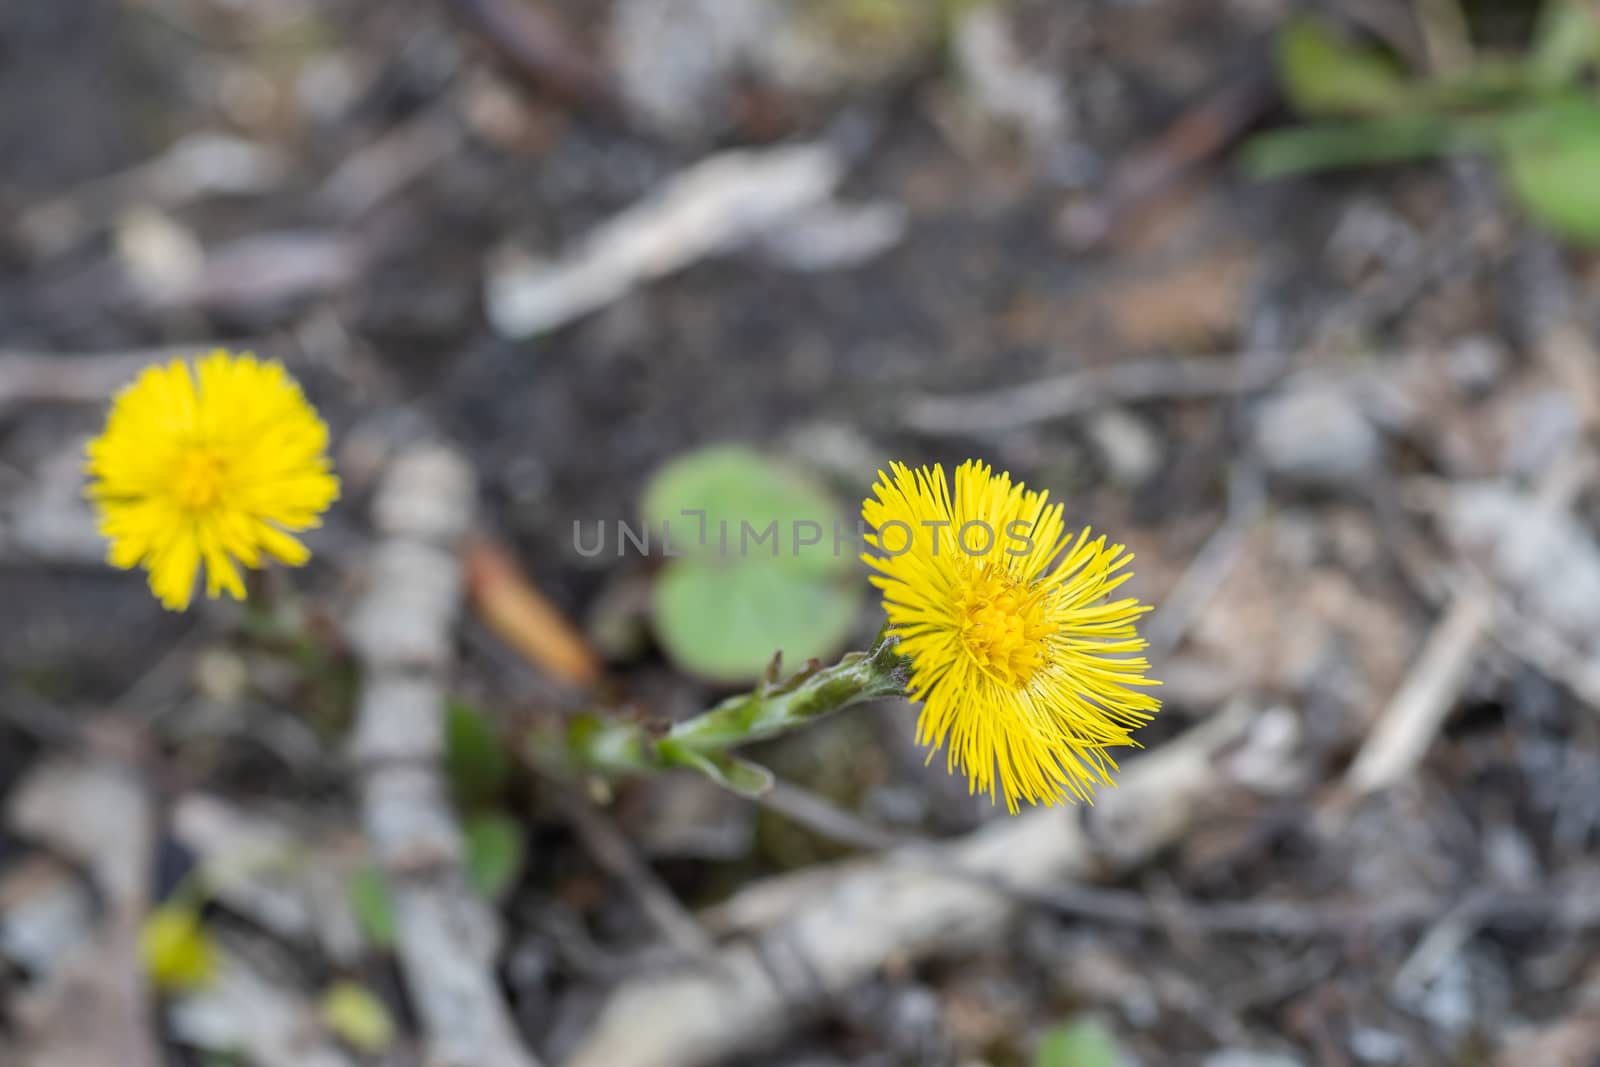 coltsfoot - Tussilago farfara also known as foalfoot or horsefoot. One of the first blooming flowers in spring. by bonilook